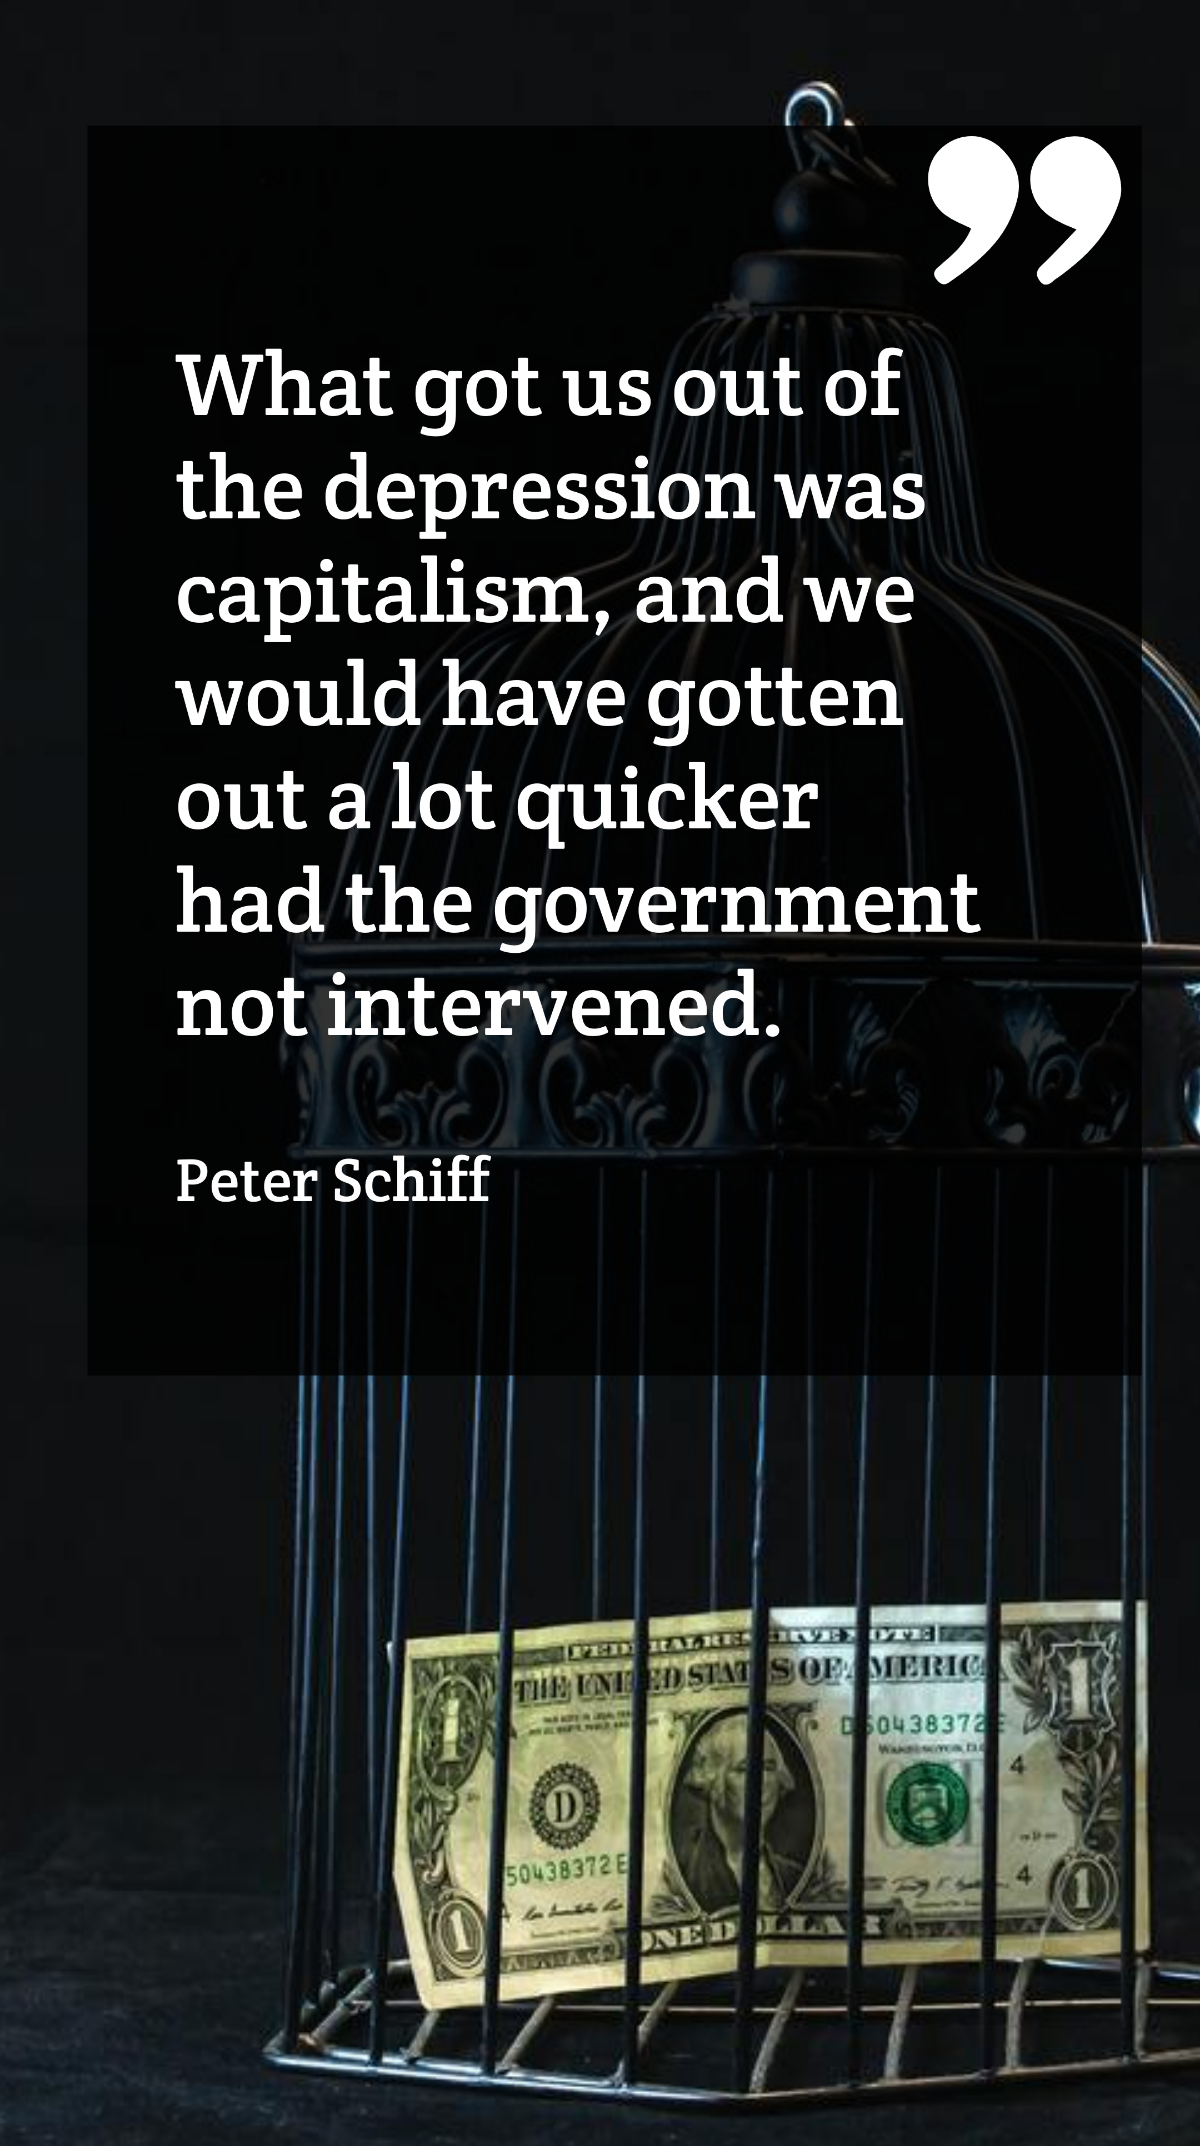 Peter Schiff - What got us out of the depression was capitalism, and we would have gotten out a lot quicker had the government not intervened. Template